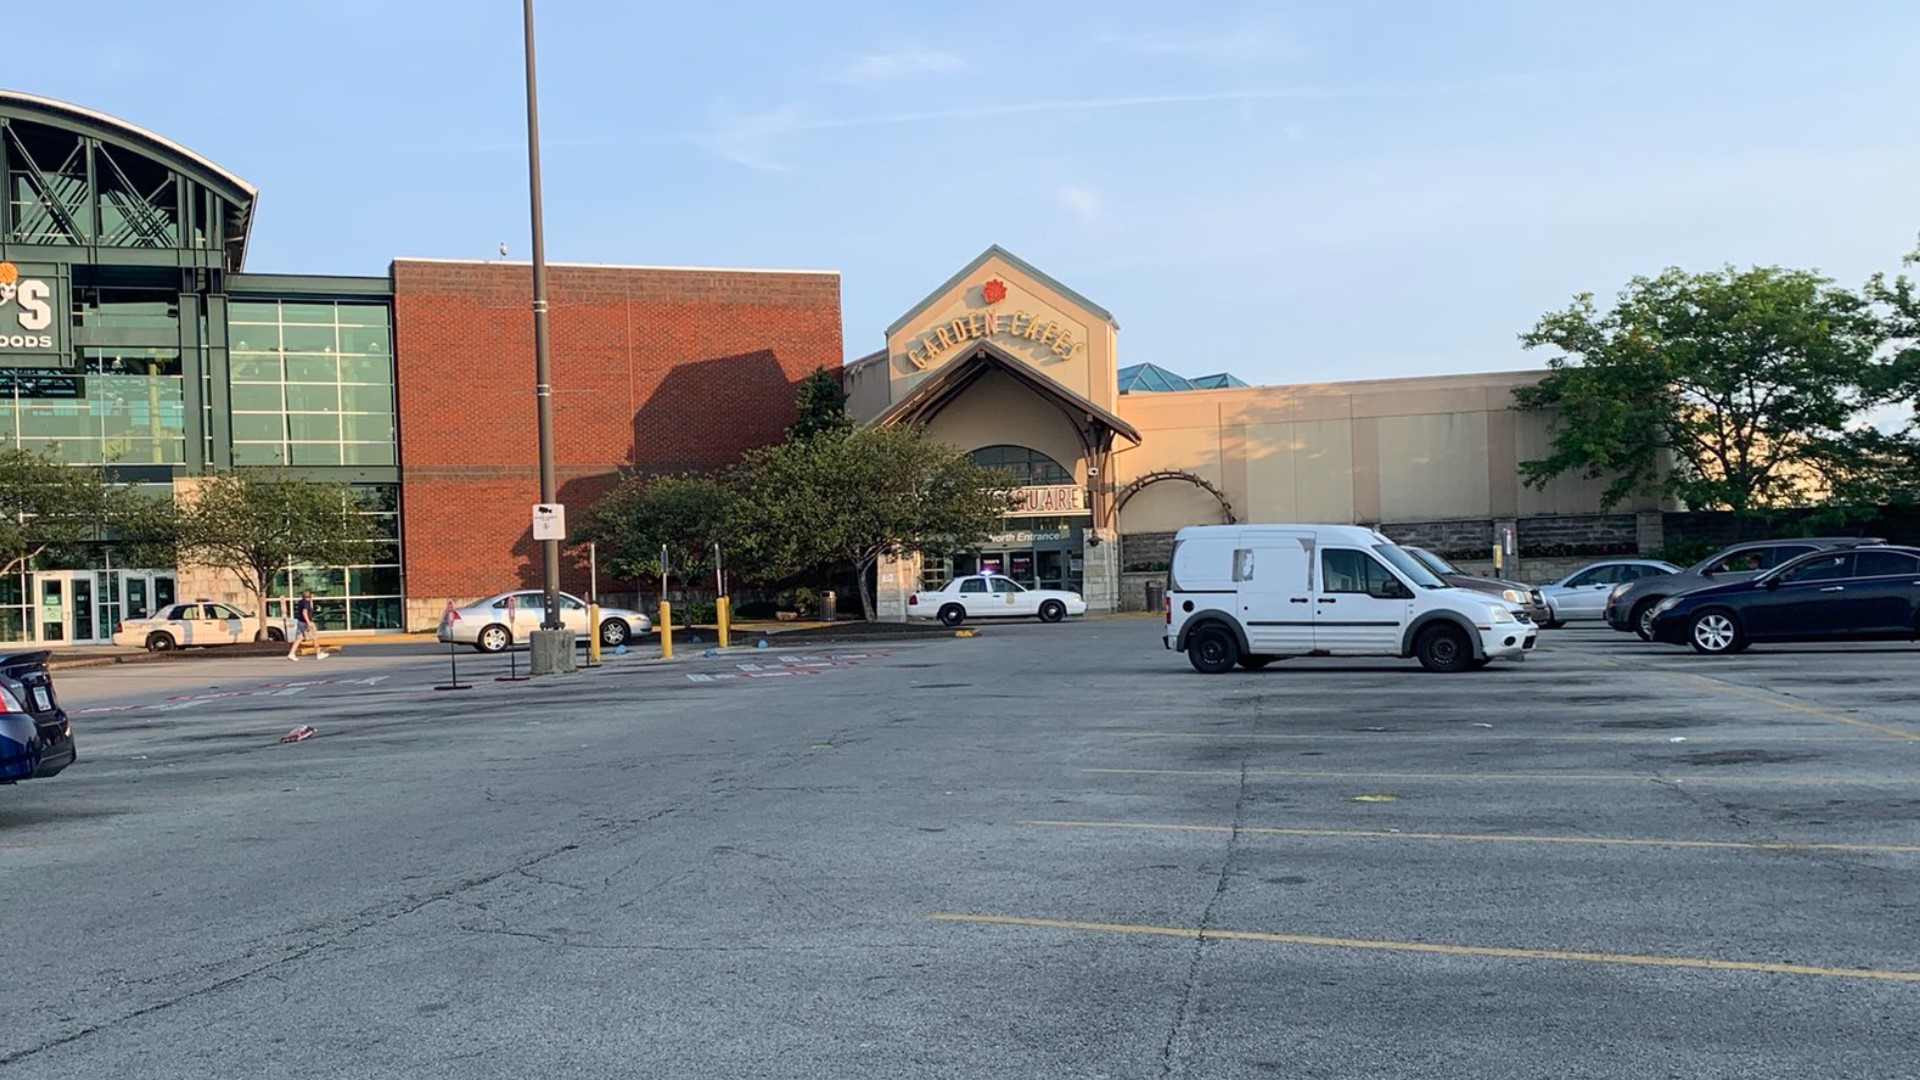 Castleton Square Mall was back open on Saturday after there was gunfire inside the mall Friday night that left one person injured.